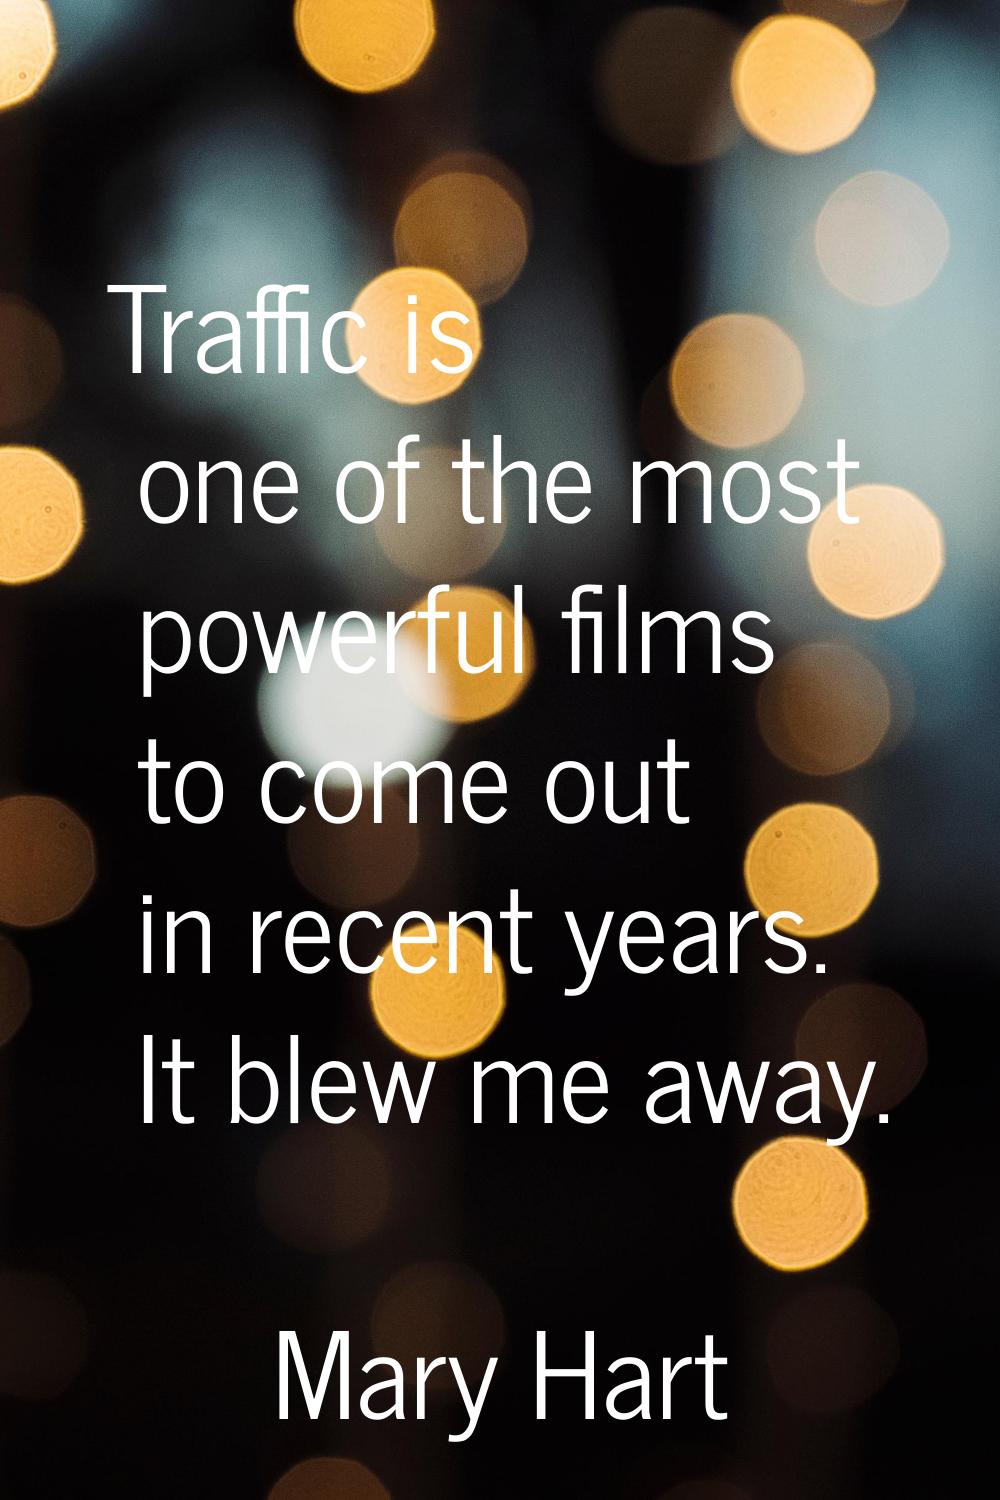 Traffic is one of the most powerful films to come out in recent years. It blew me away.